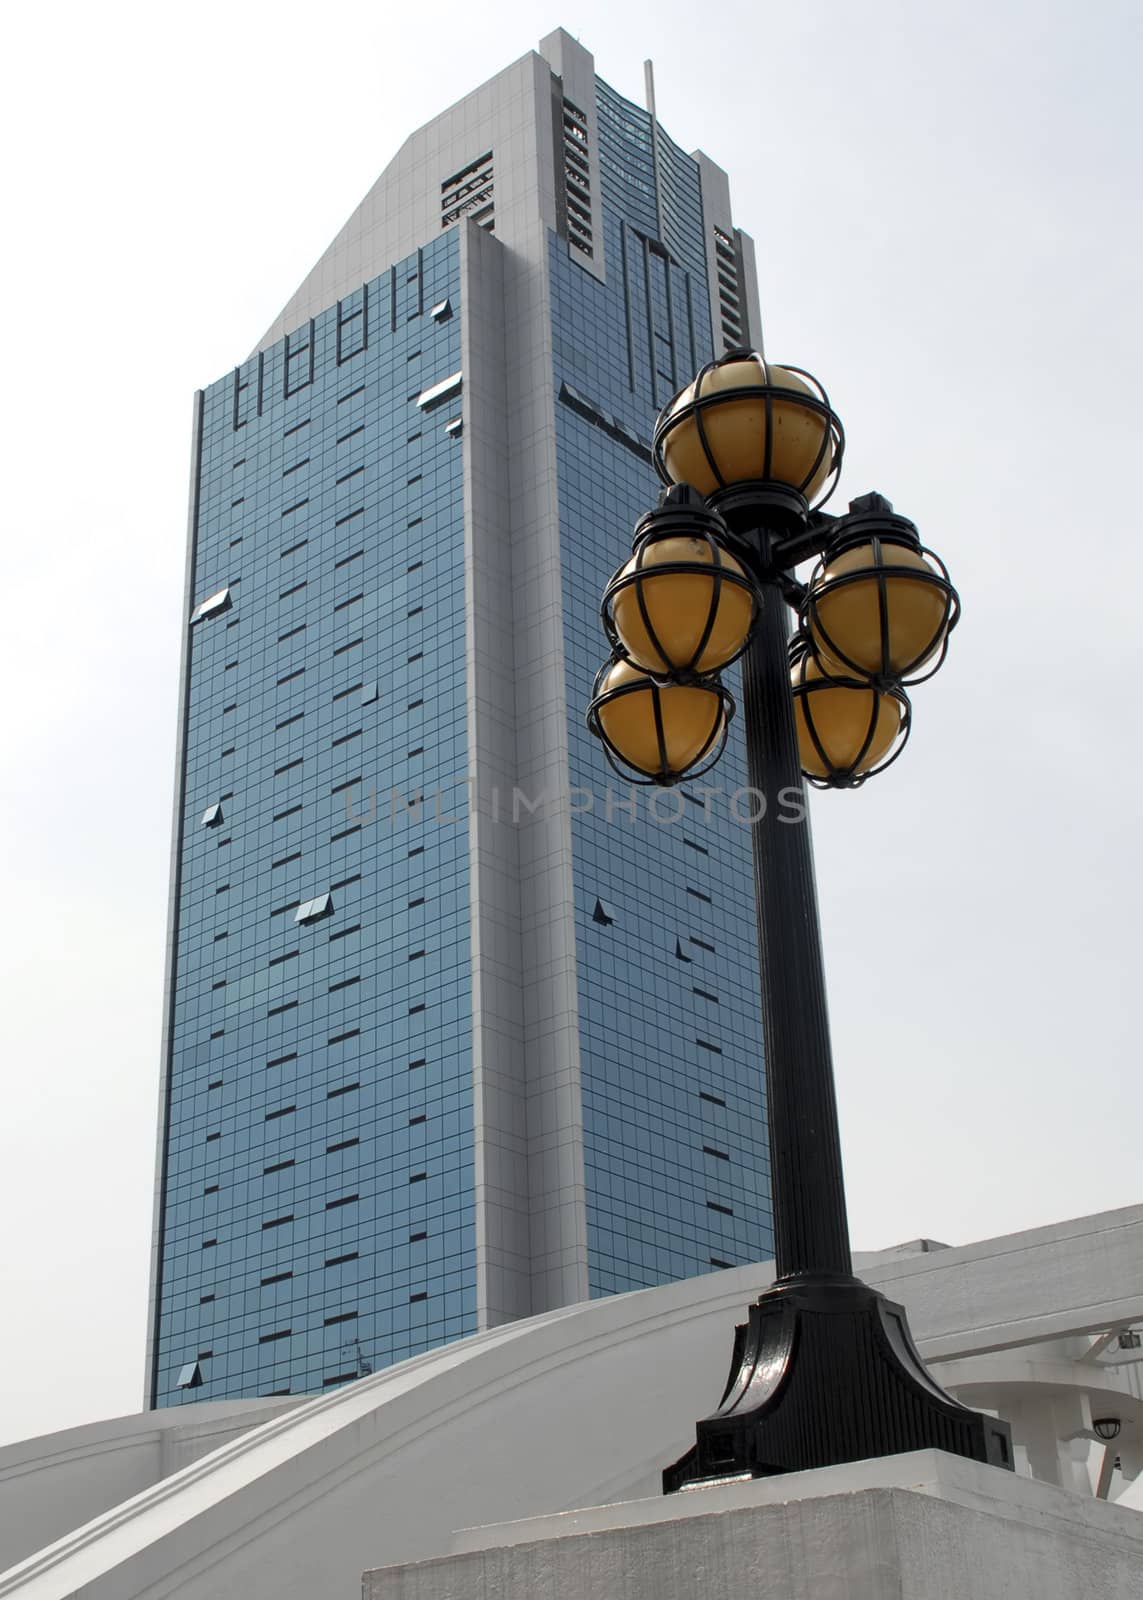 Skyscraper and Lamp by npologuy